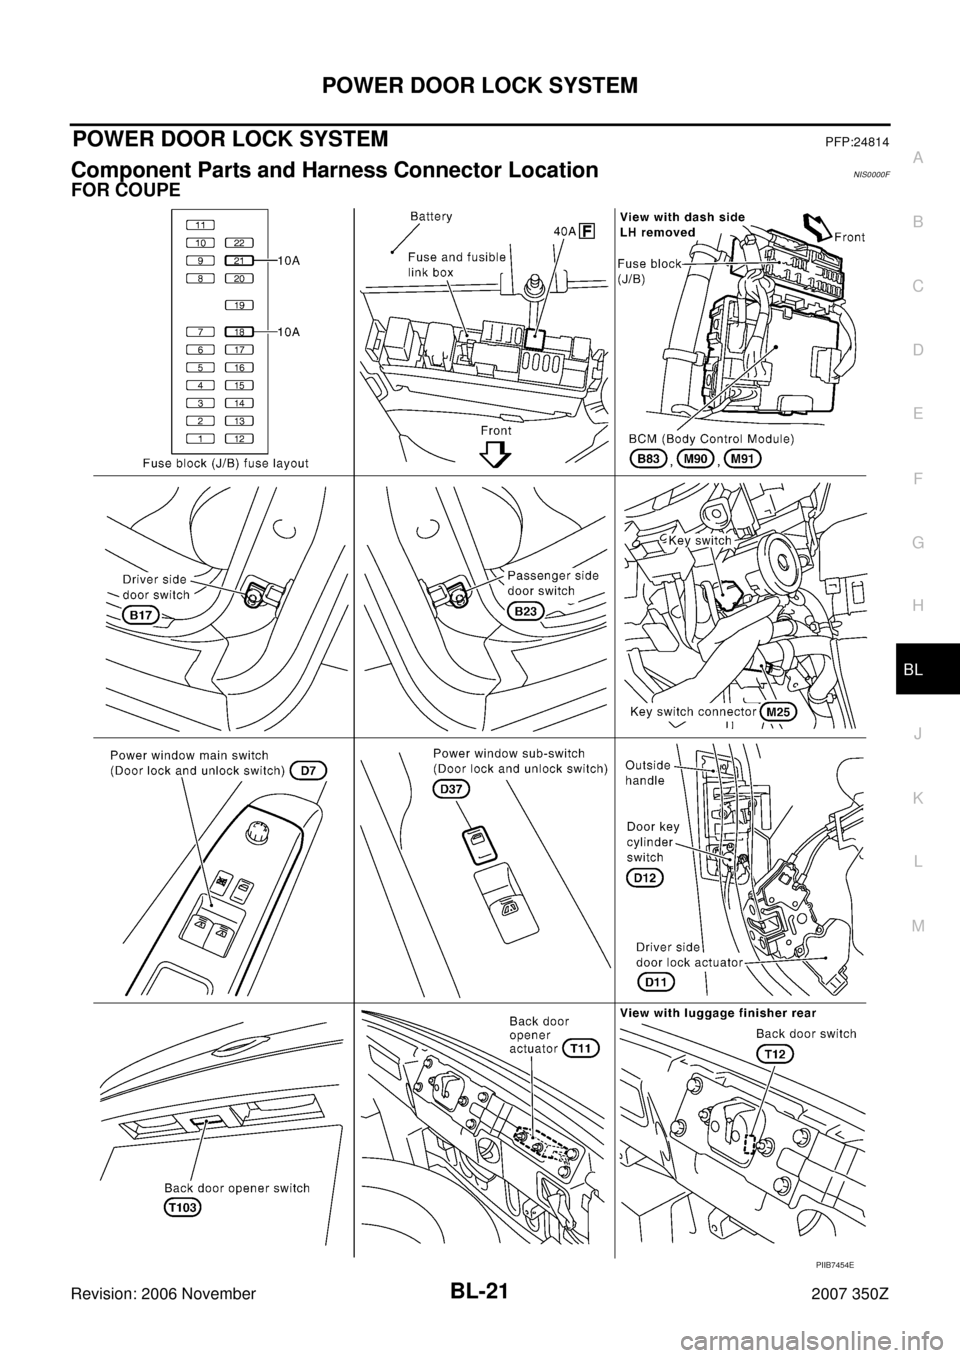 NISSAN 350Z 2007 Z33 Body, Lock And Security System Workshop Manual POWER DOOR LOCK SYSTEM
BL-21
C
D
E
F
G
H
J
K
L
MA
B
BL
Revision: 2006 November2007 350Z
POWER DOOR LOCK SYSTEMPFP:24814
Component Parts and Harness Connector LocationNIS0000F
FOR COUPE
PIIB7454E 